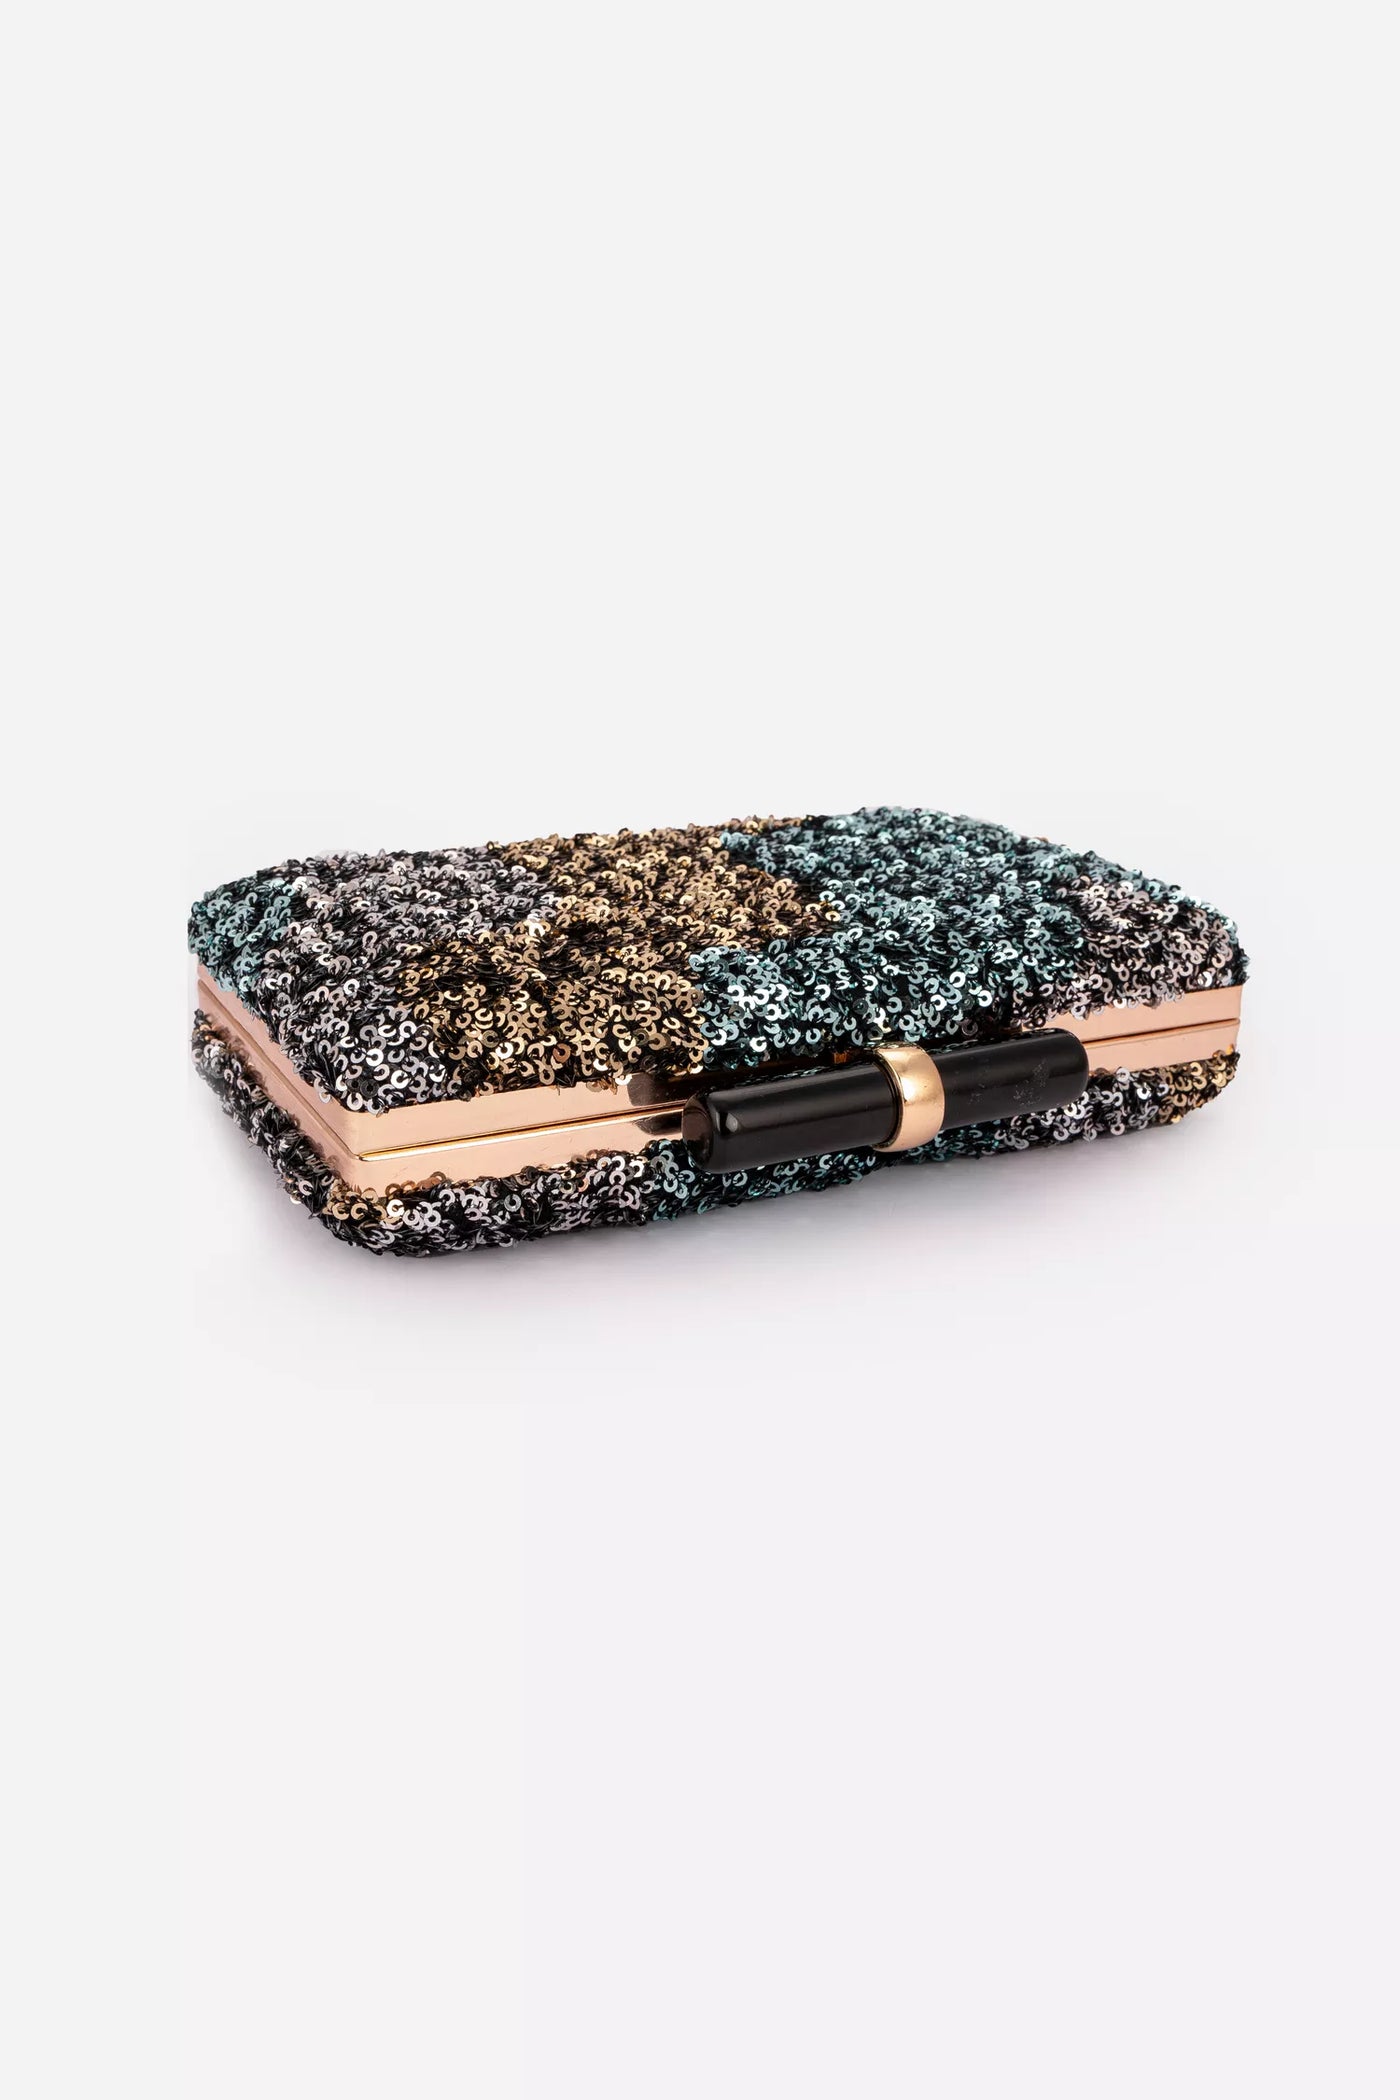 Blue And Brown Clutch Bag